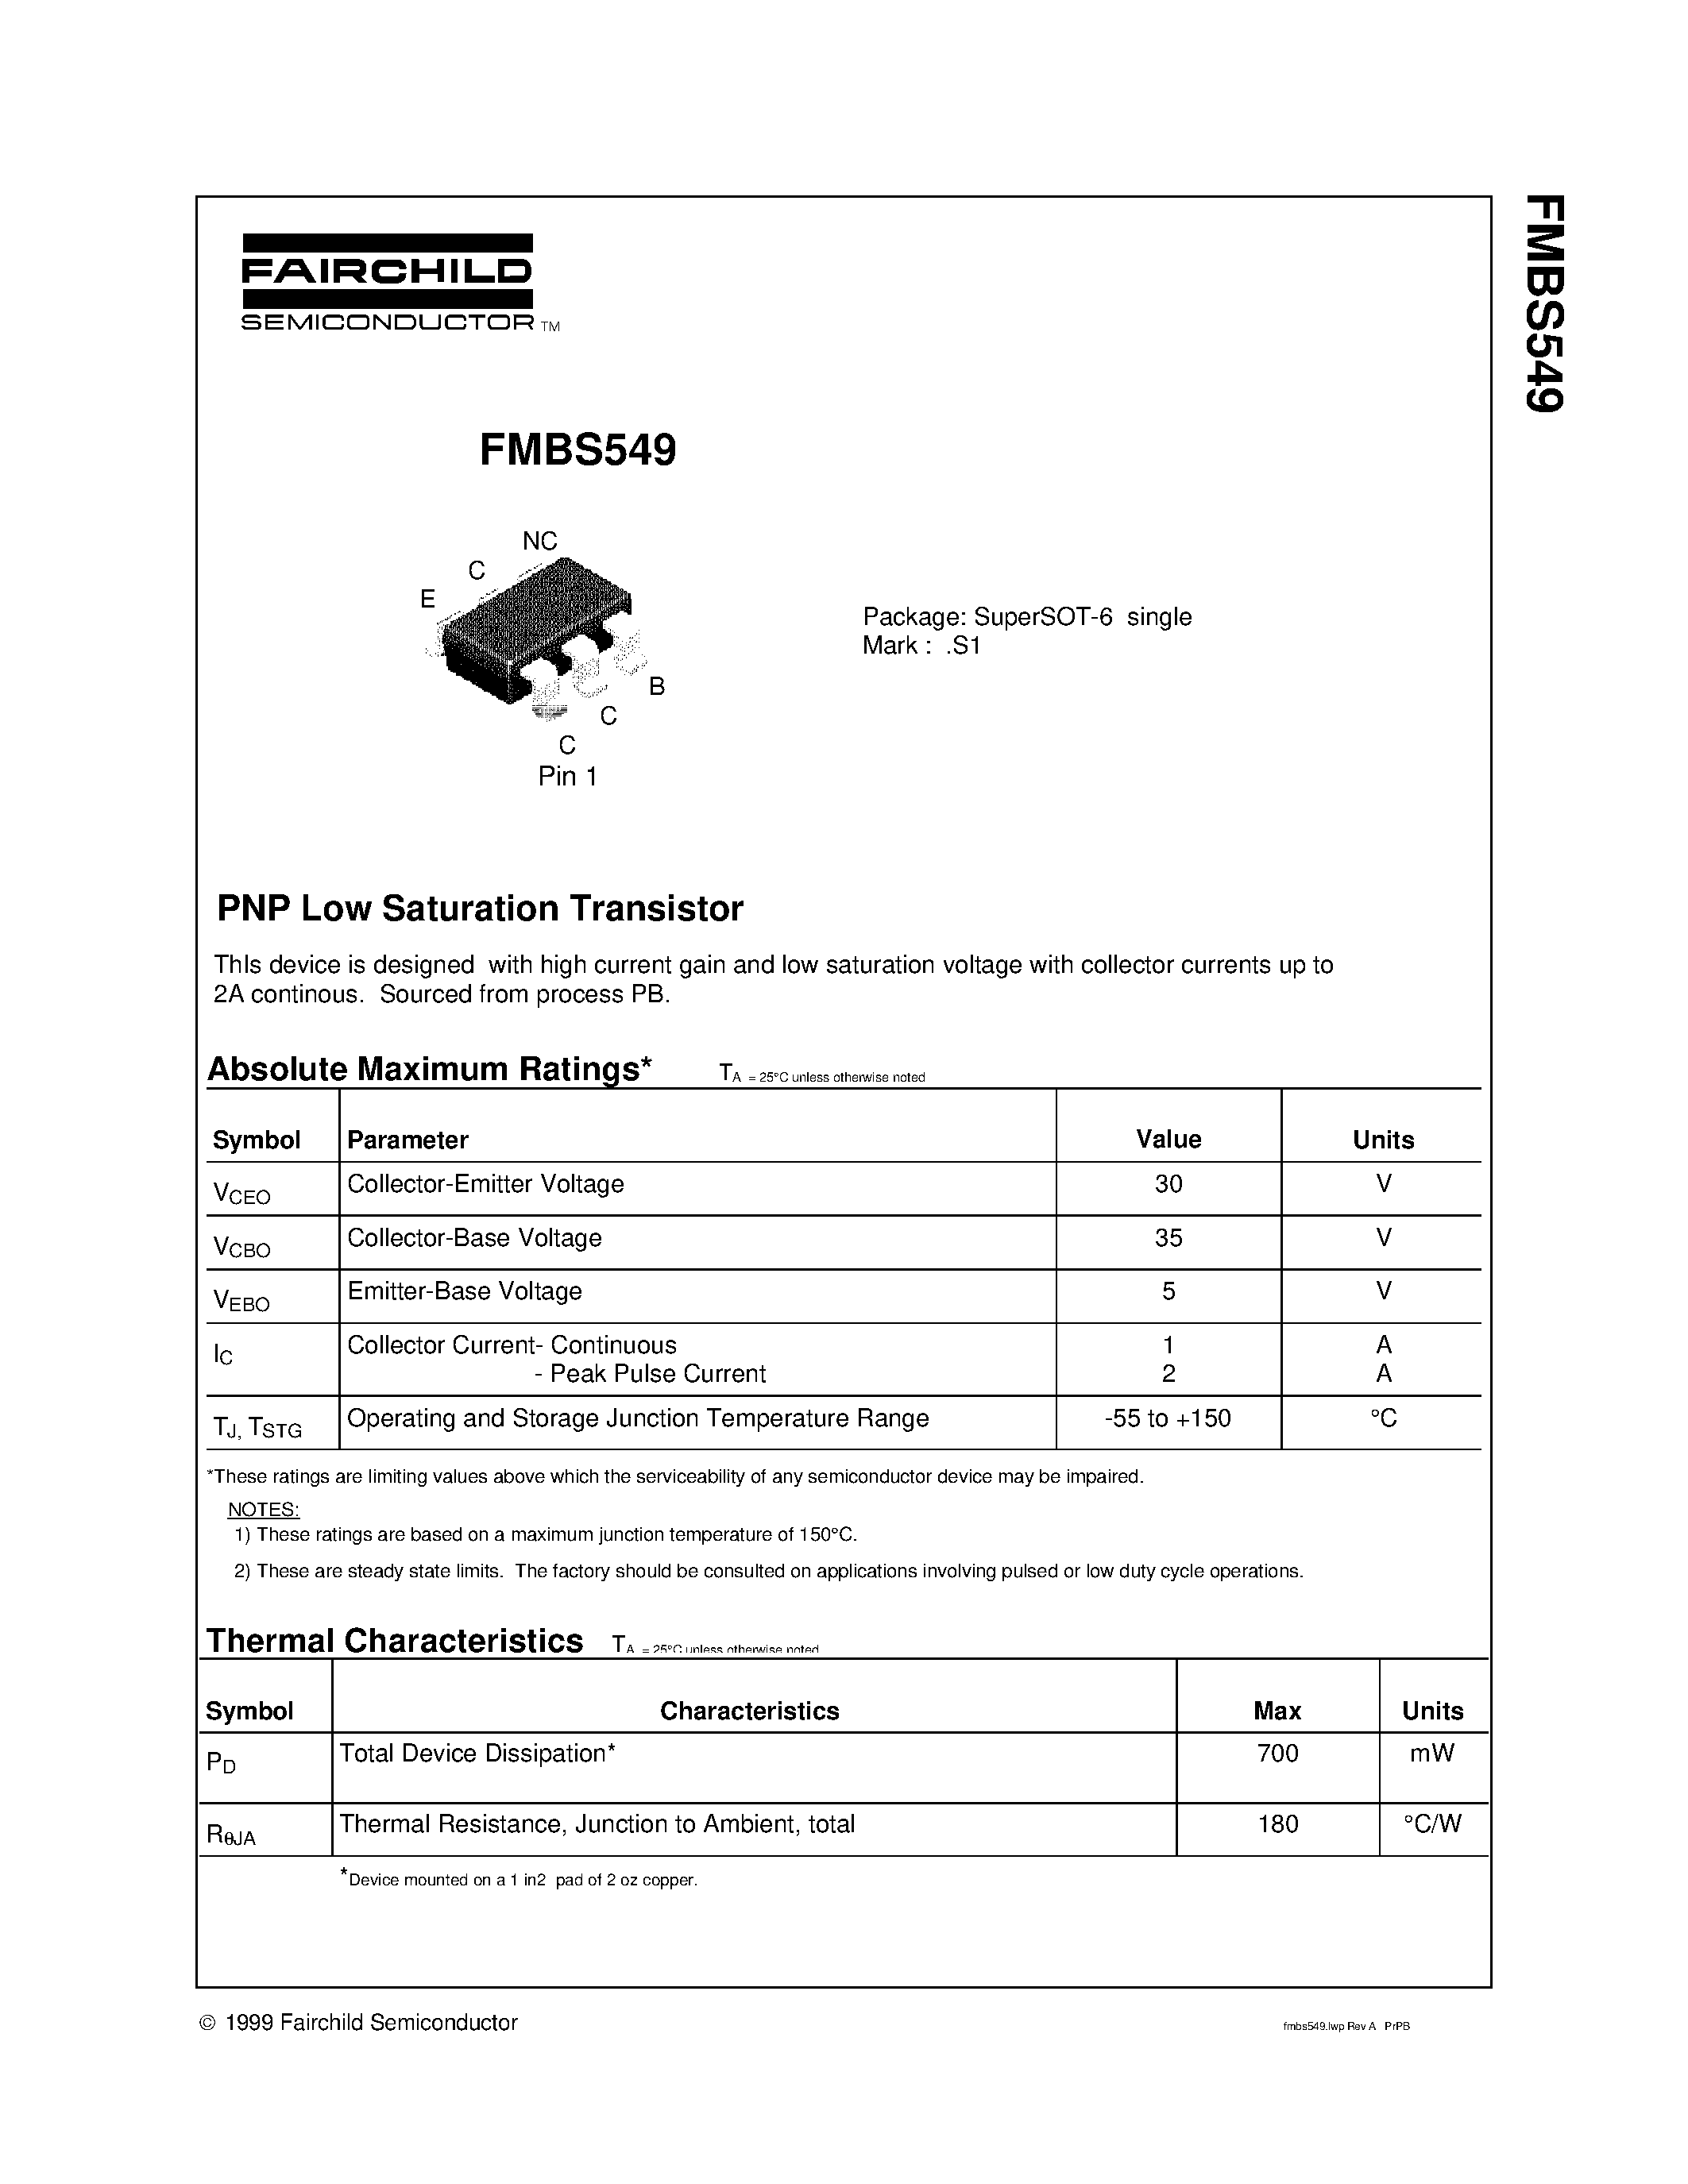 Datasheet FMBS549 - PNP Low Saturation Transistor page 1